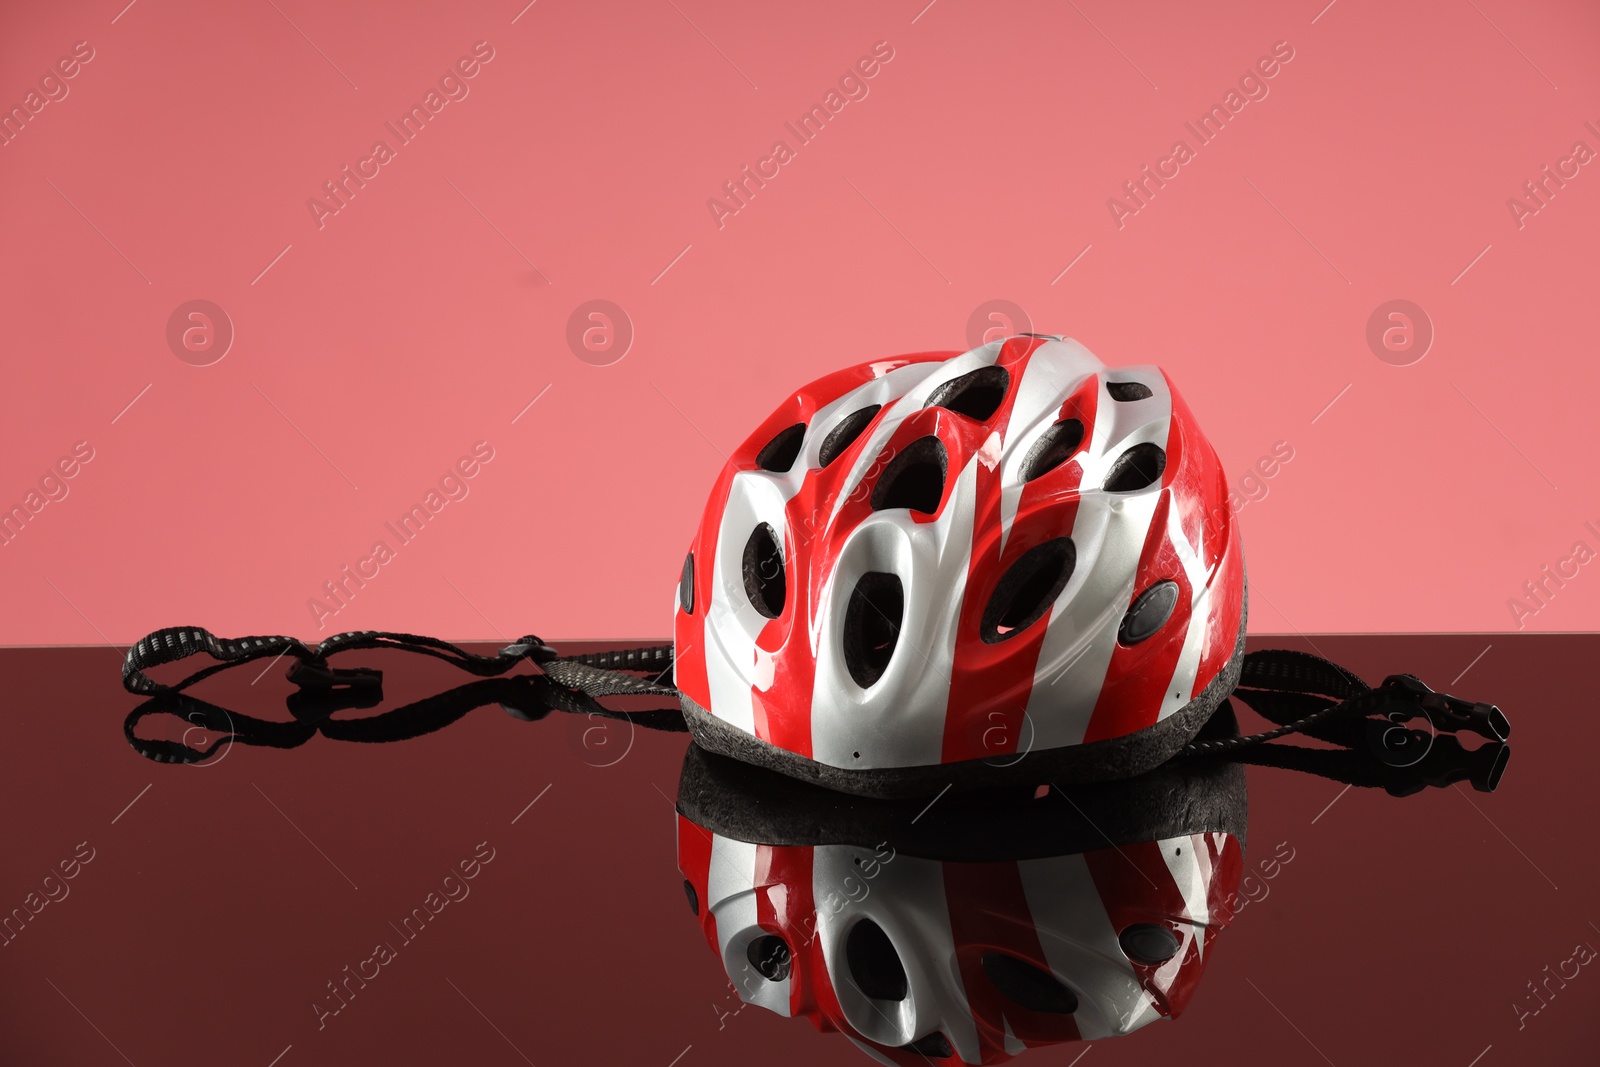 Photo of Protective helmet on mirror surface against pink background. Space for text